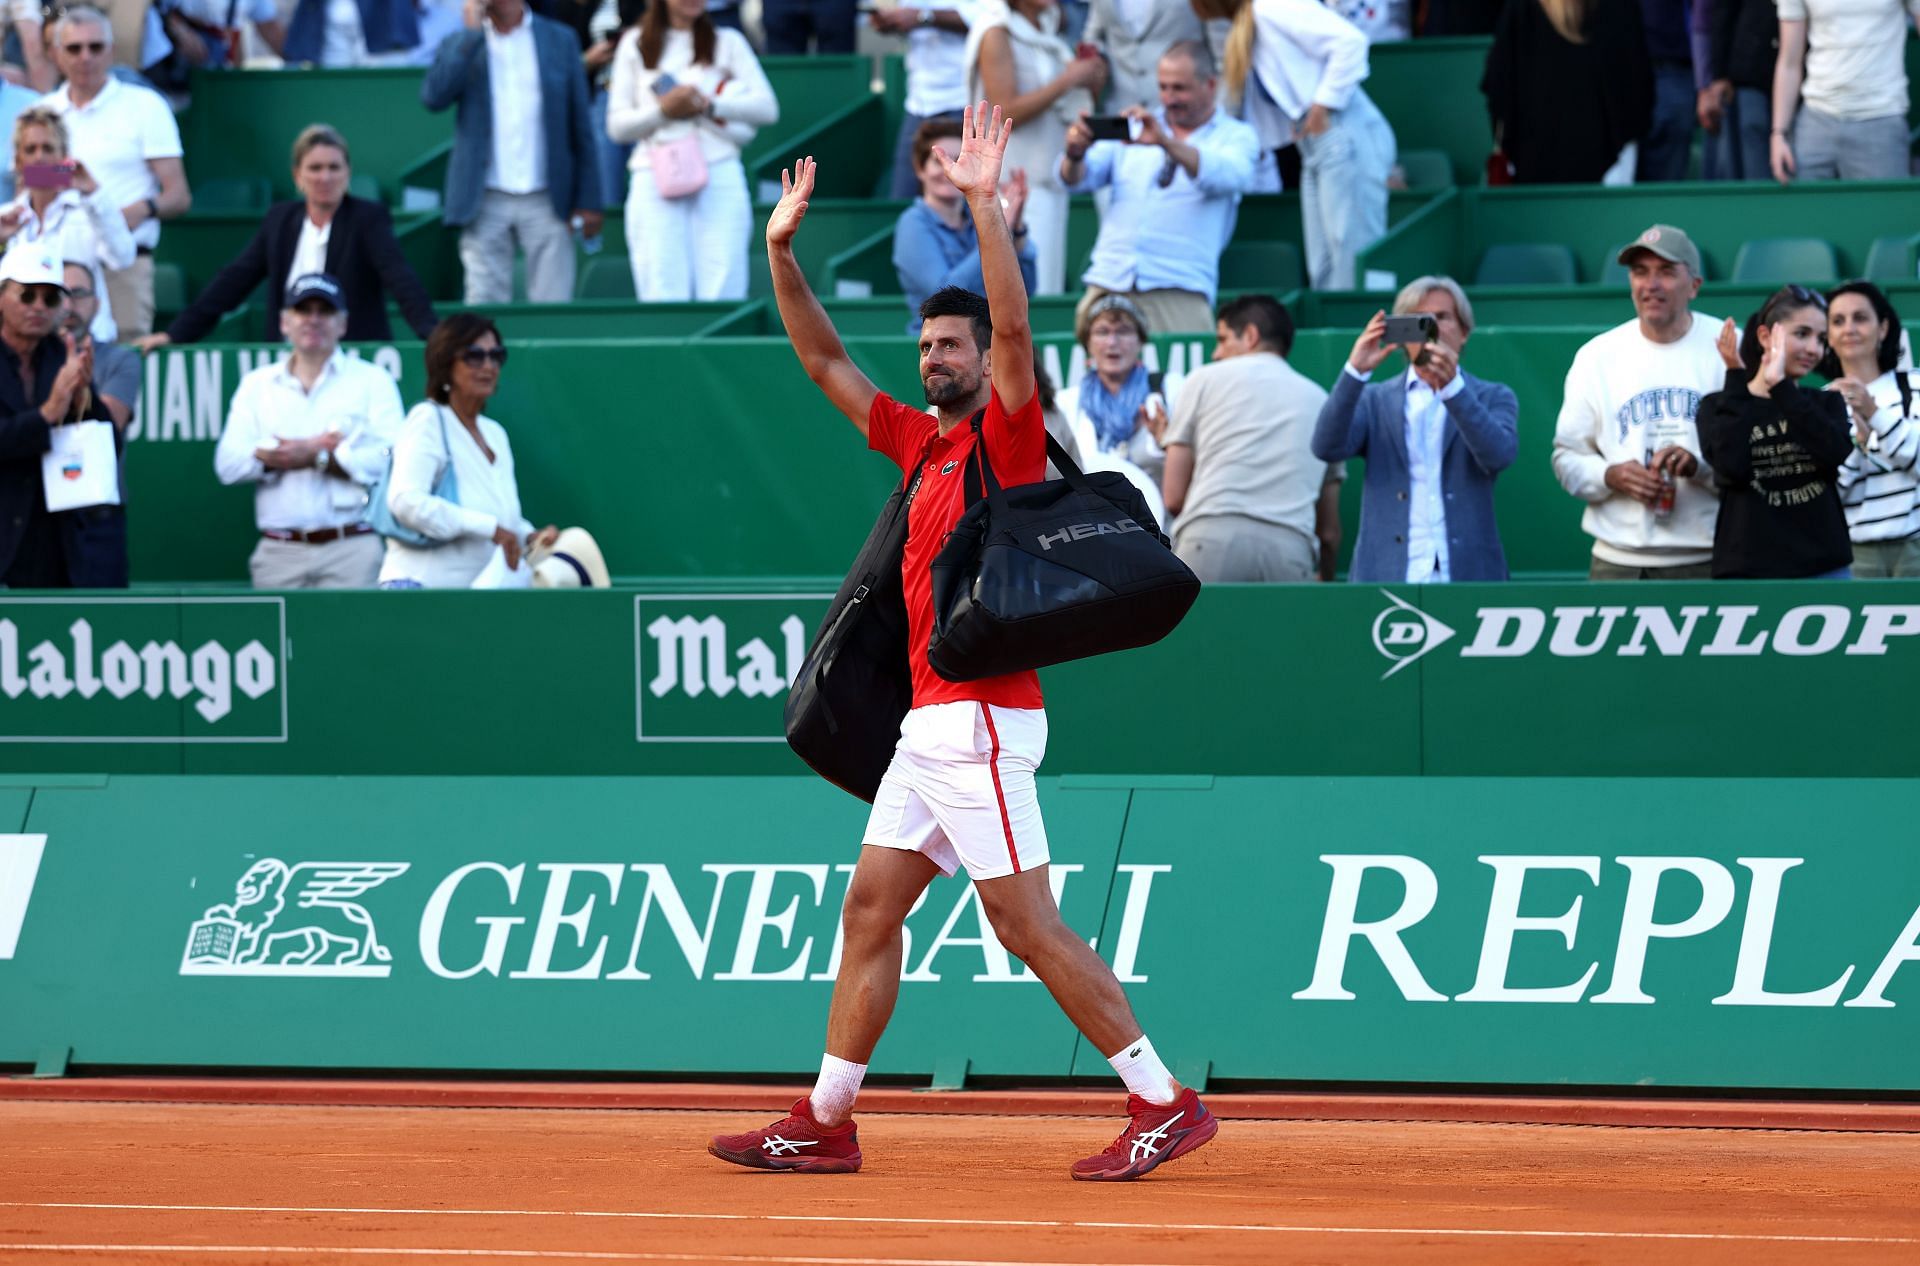 Novak Djokovic waves goodbye to the crowd after his semi-final loss at the Monte Carlo Masters